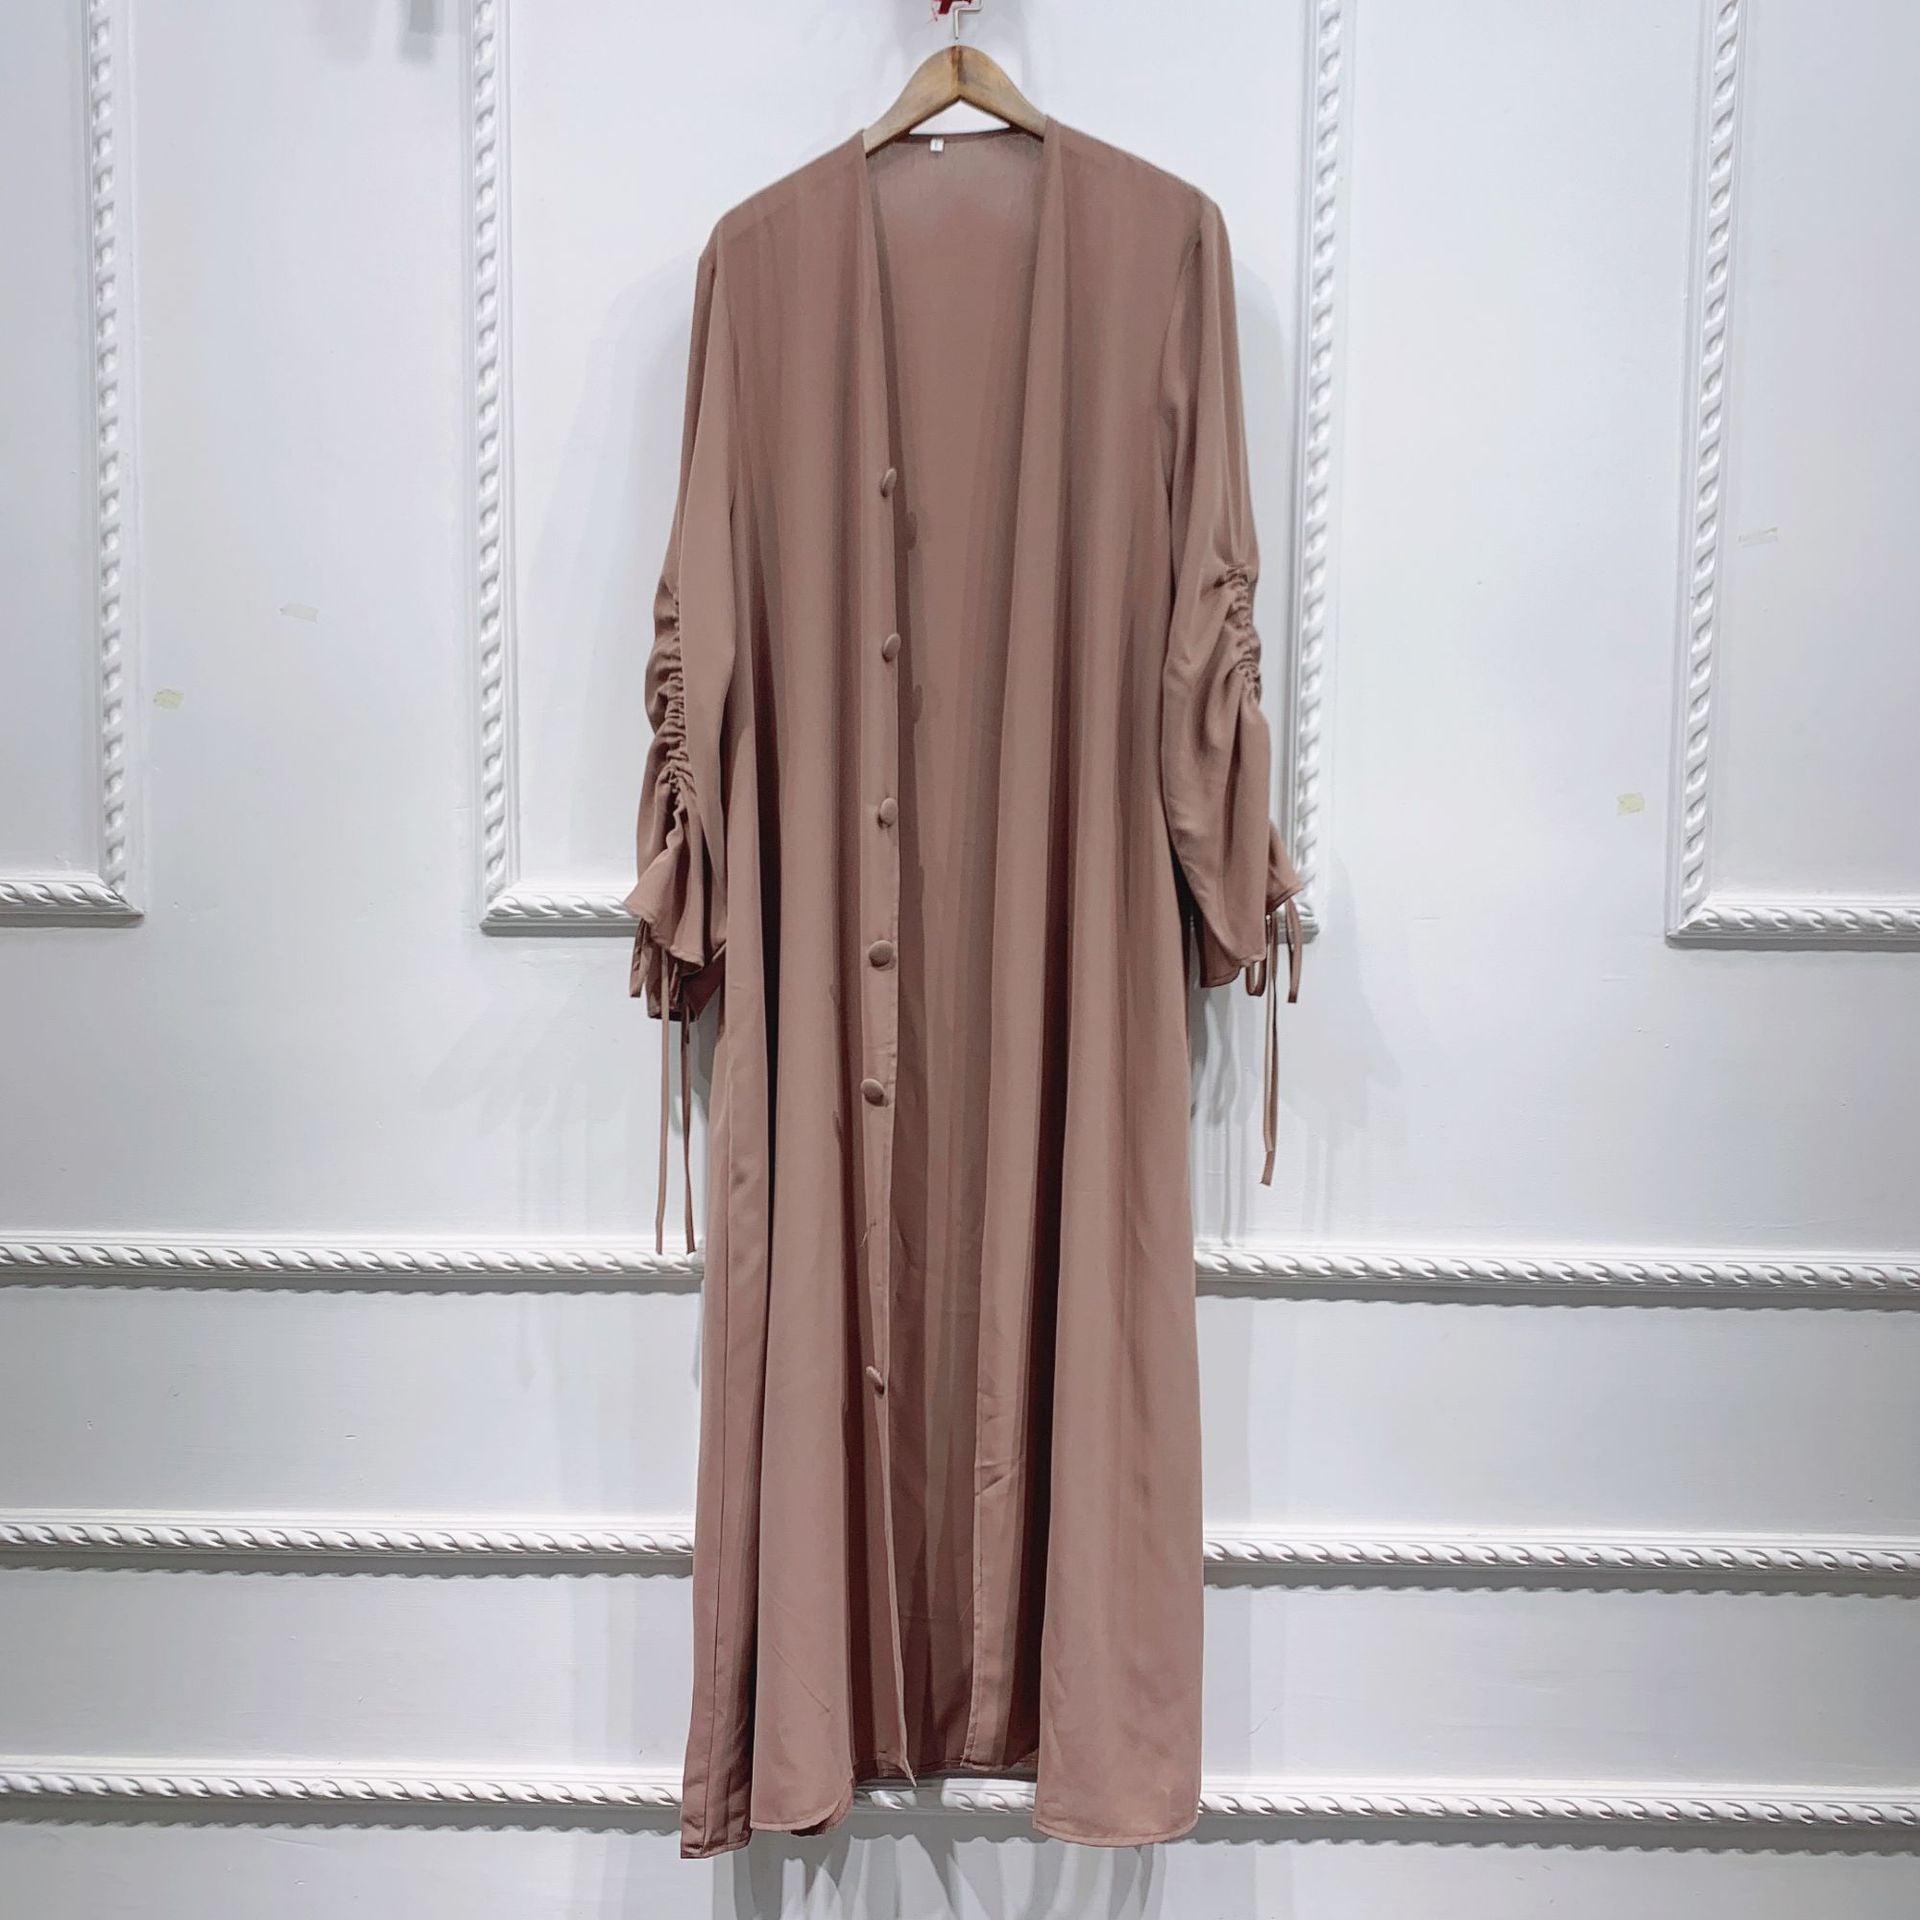 Middle Eastern Women's Robe - Try Modest Limited 